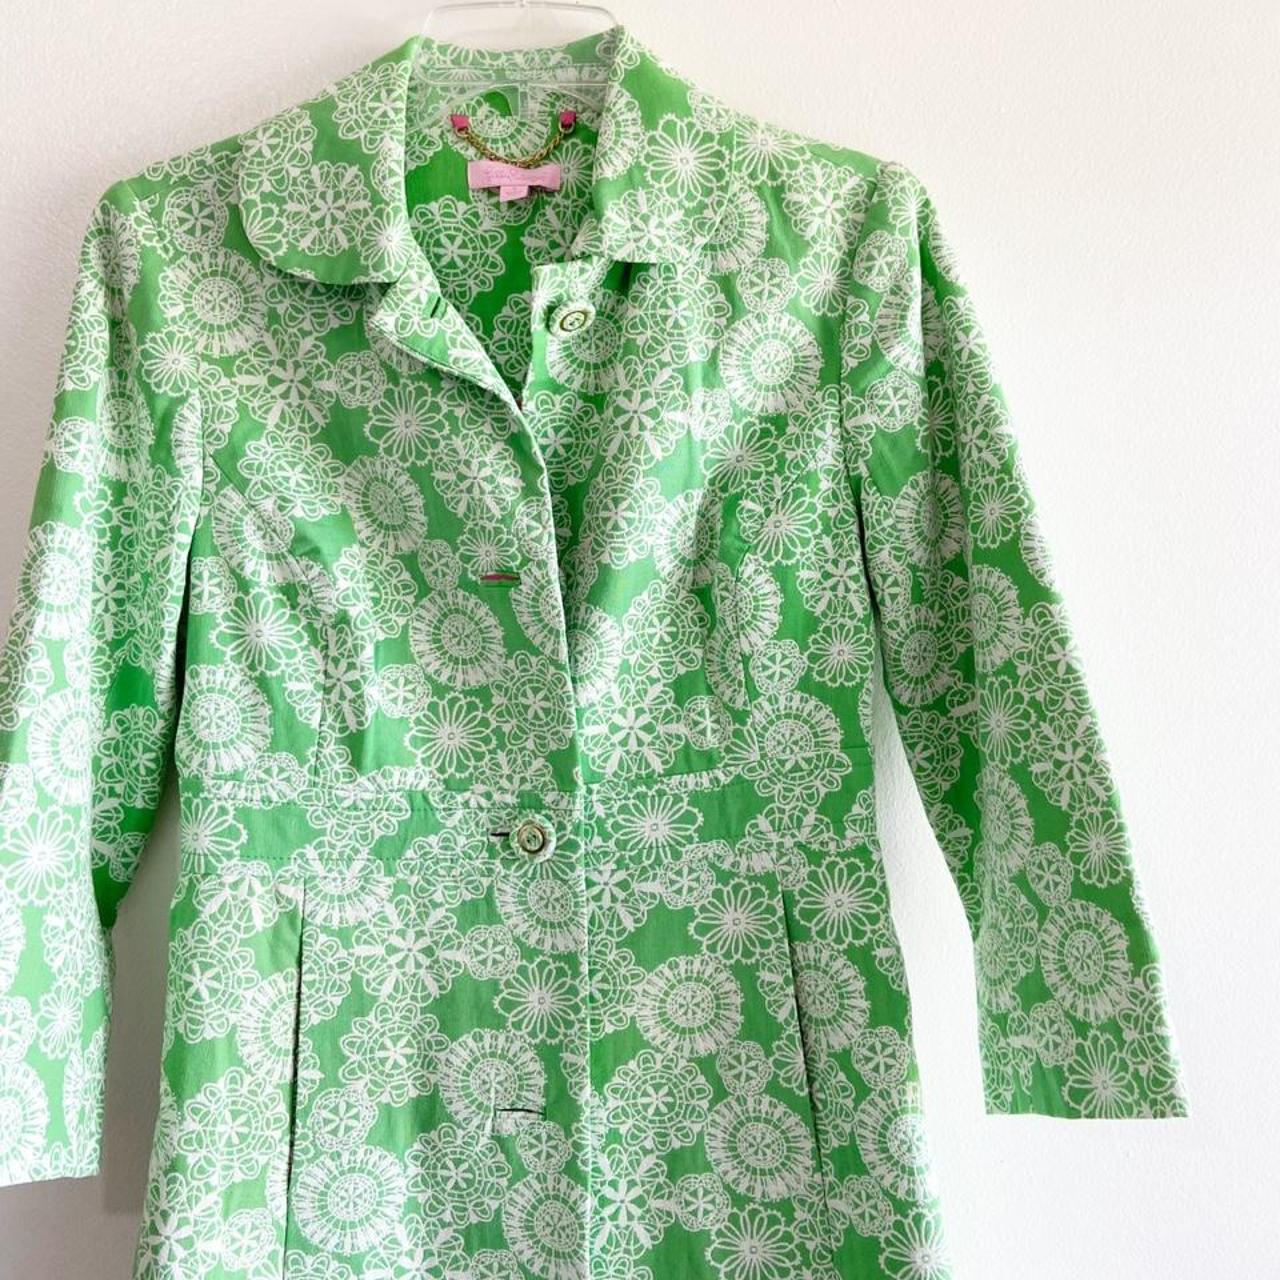 Lilly Pulitzer Women's Green and White Coat | Depop